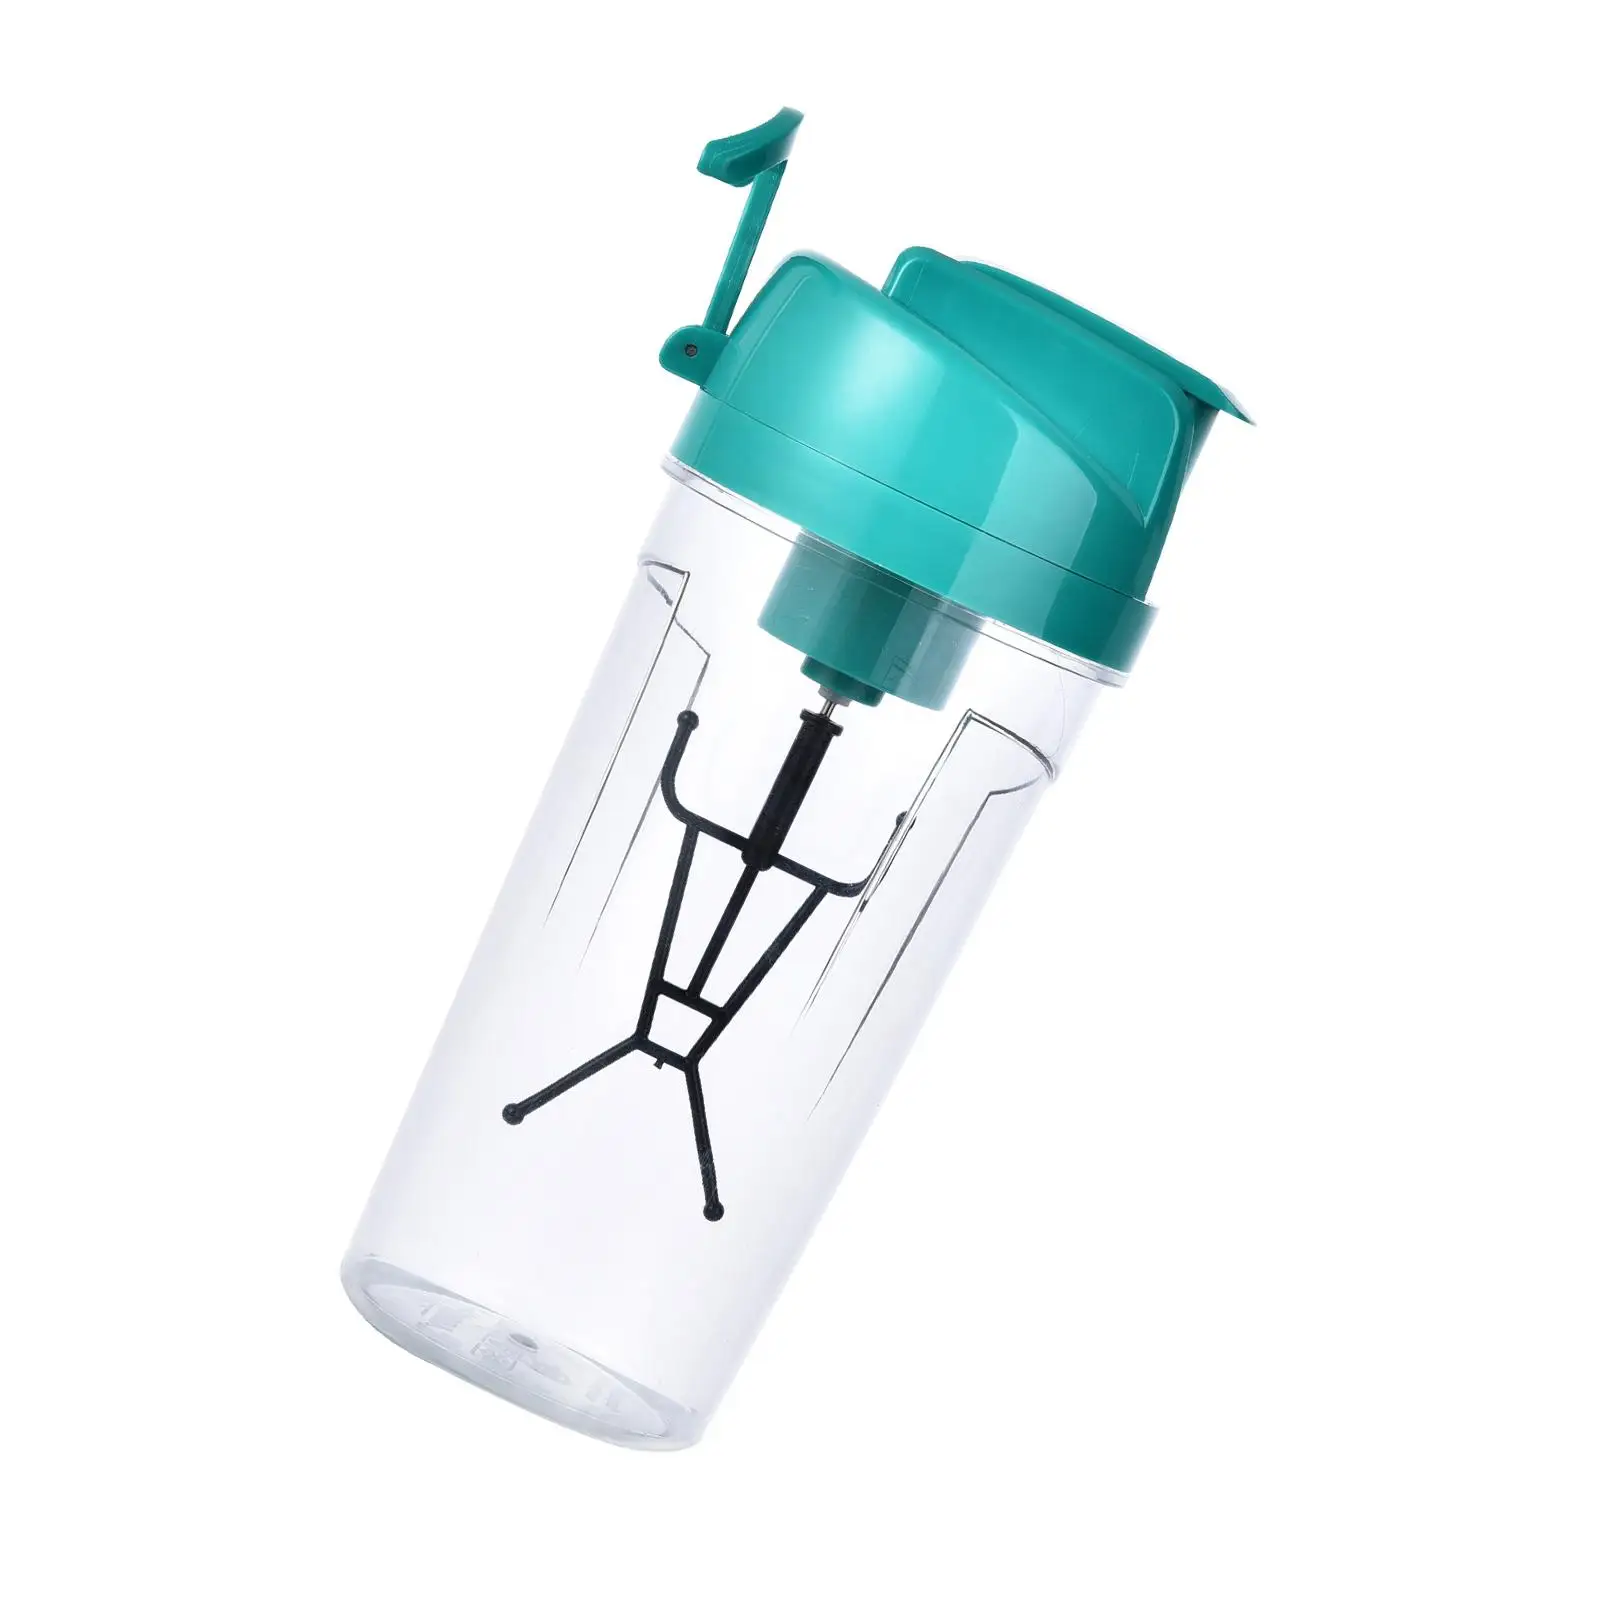 Portable Electric Shaker Bottle Self Stirring Drinking Leakproof Mixing Cup